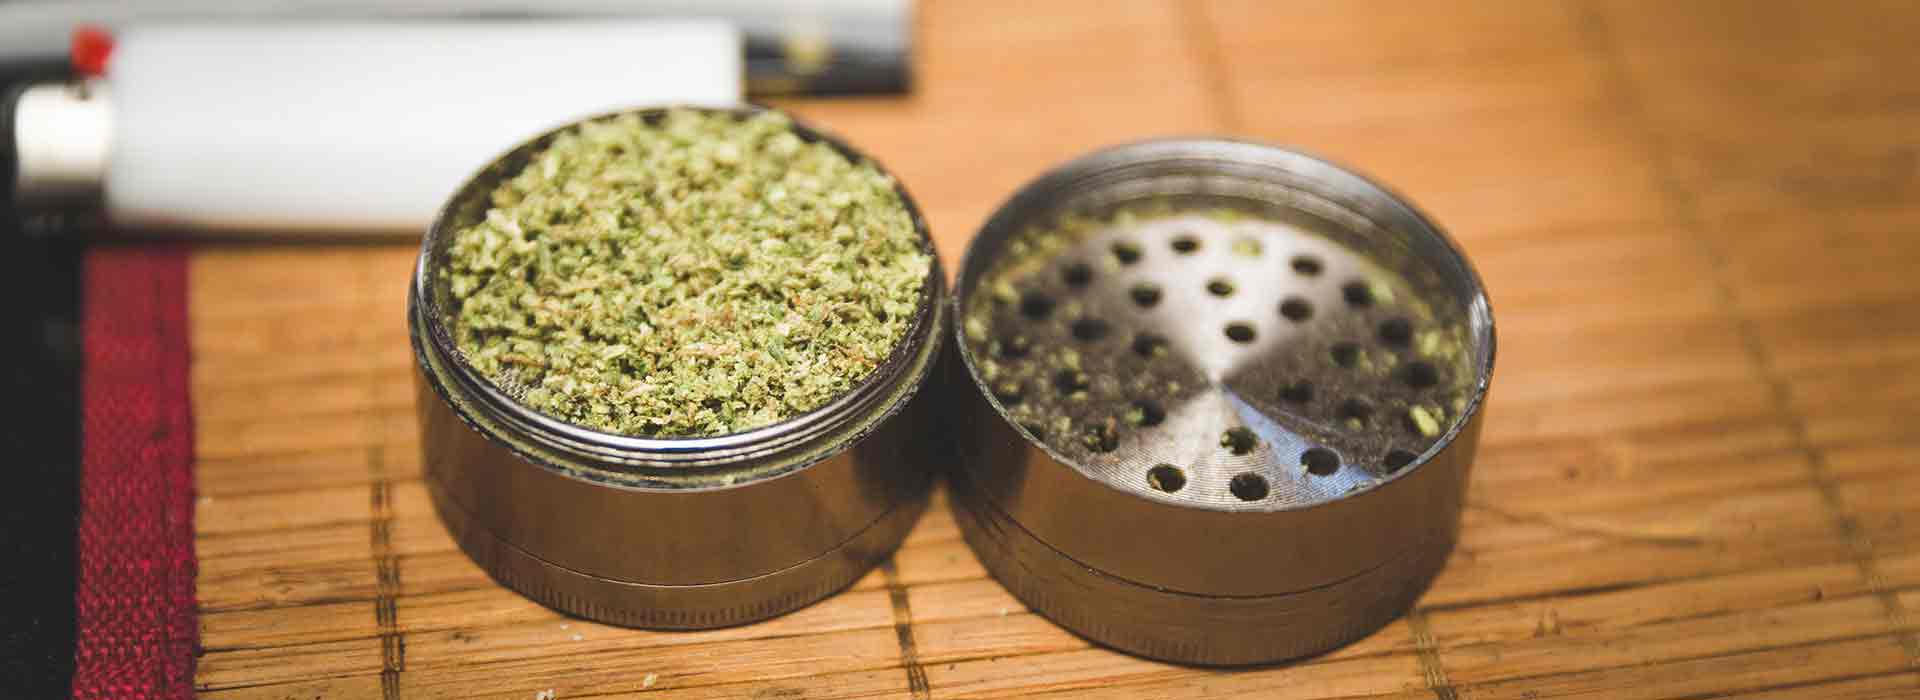 Should You Use a Grinder for Weed? To Grind, or Not to Grind - The Dab  Lab